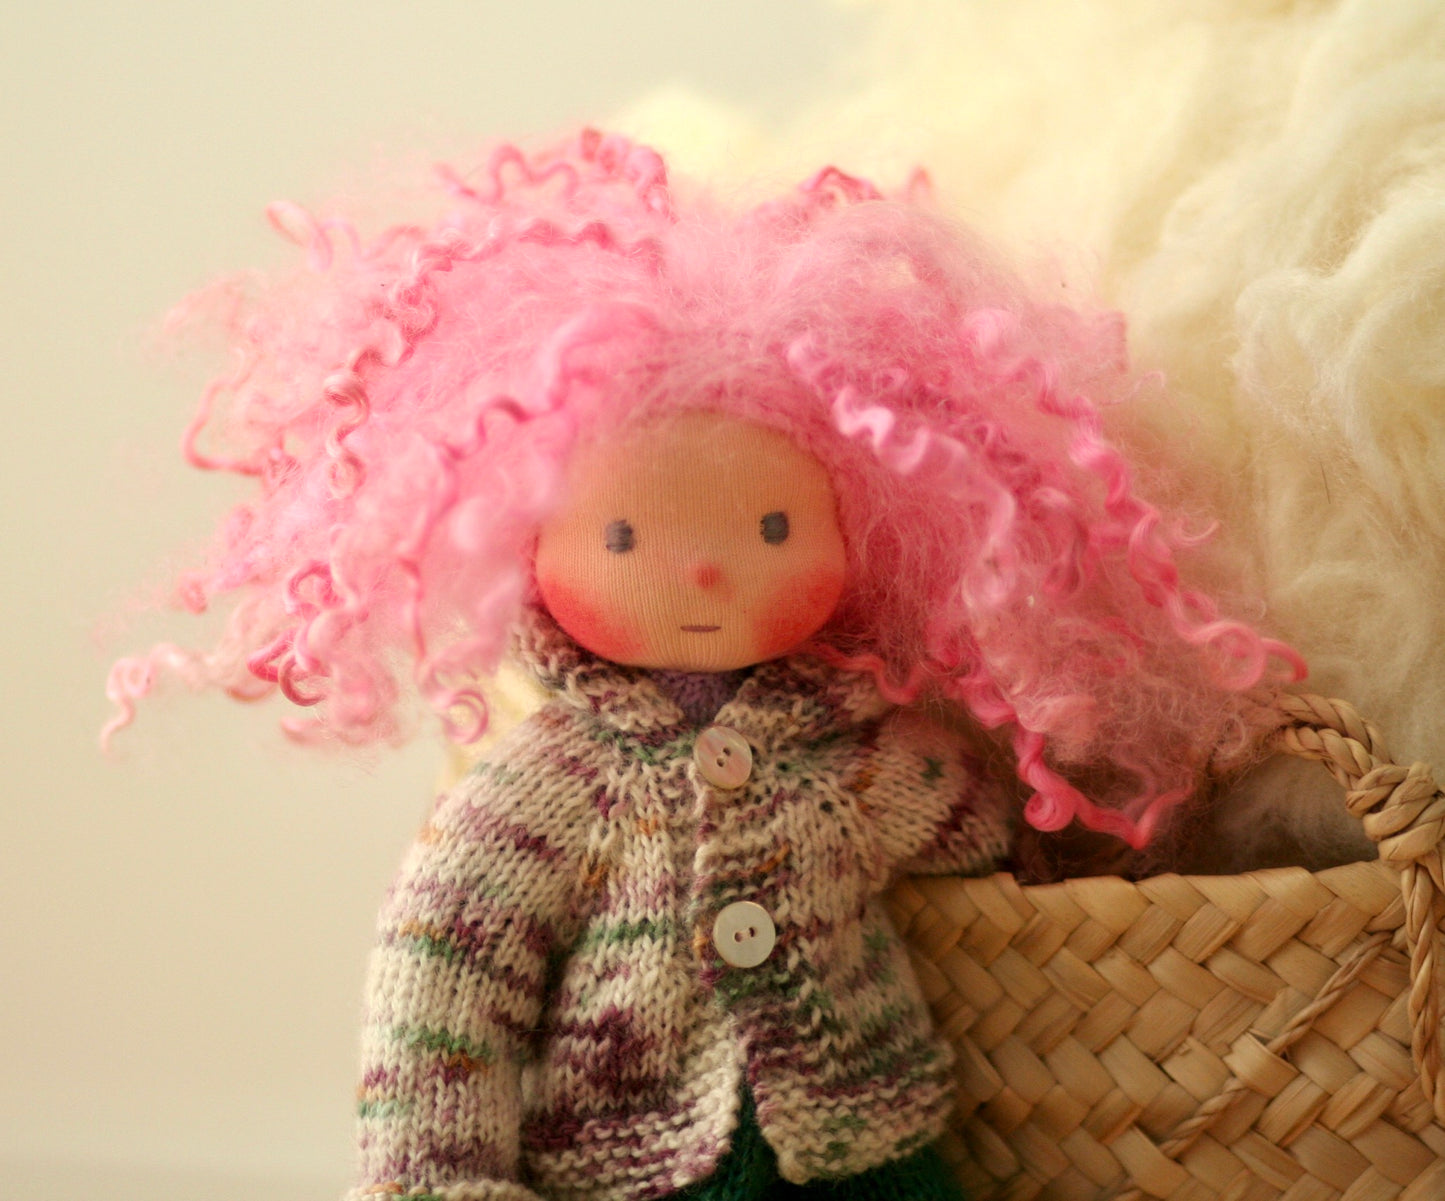 Reserved for Ira!!! Maya - Peperuda knitted doll, Waldorf doll, art doll, soft doll, handmade doll, puppen